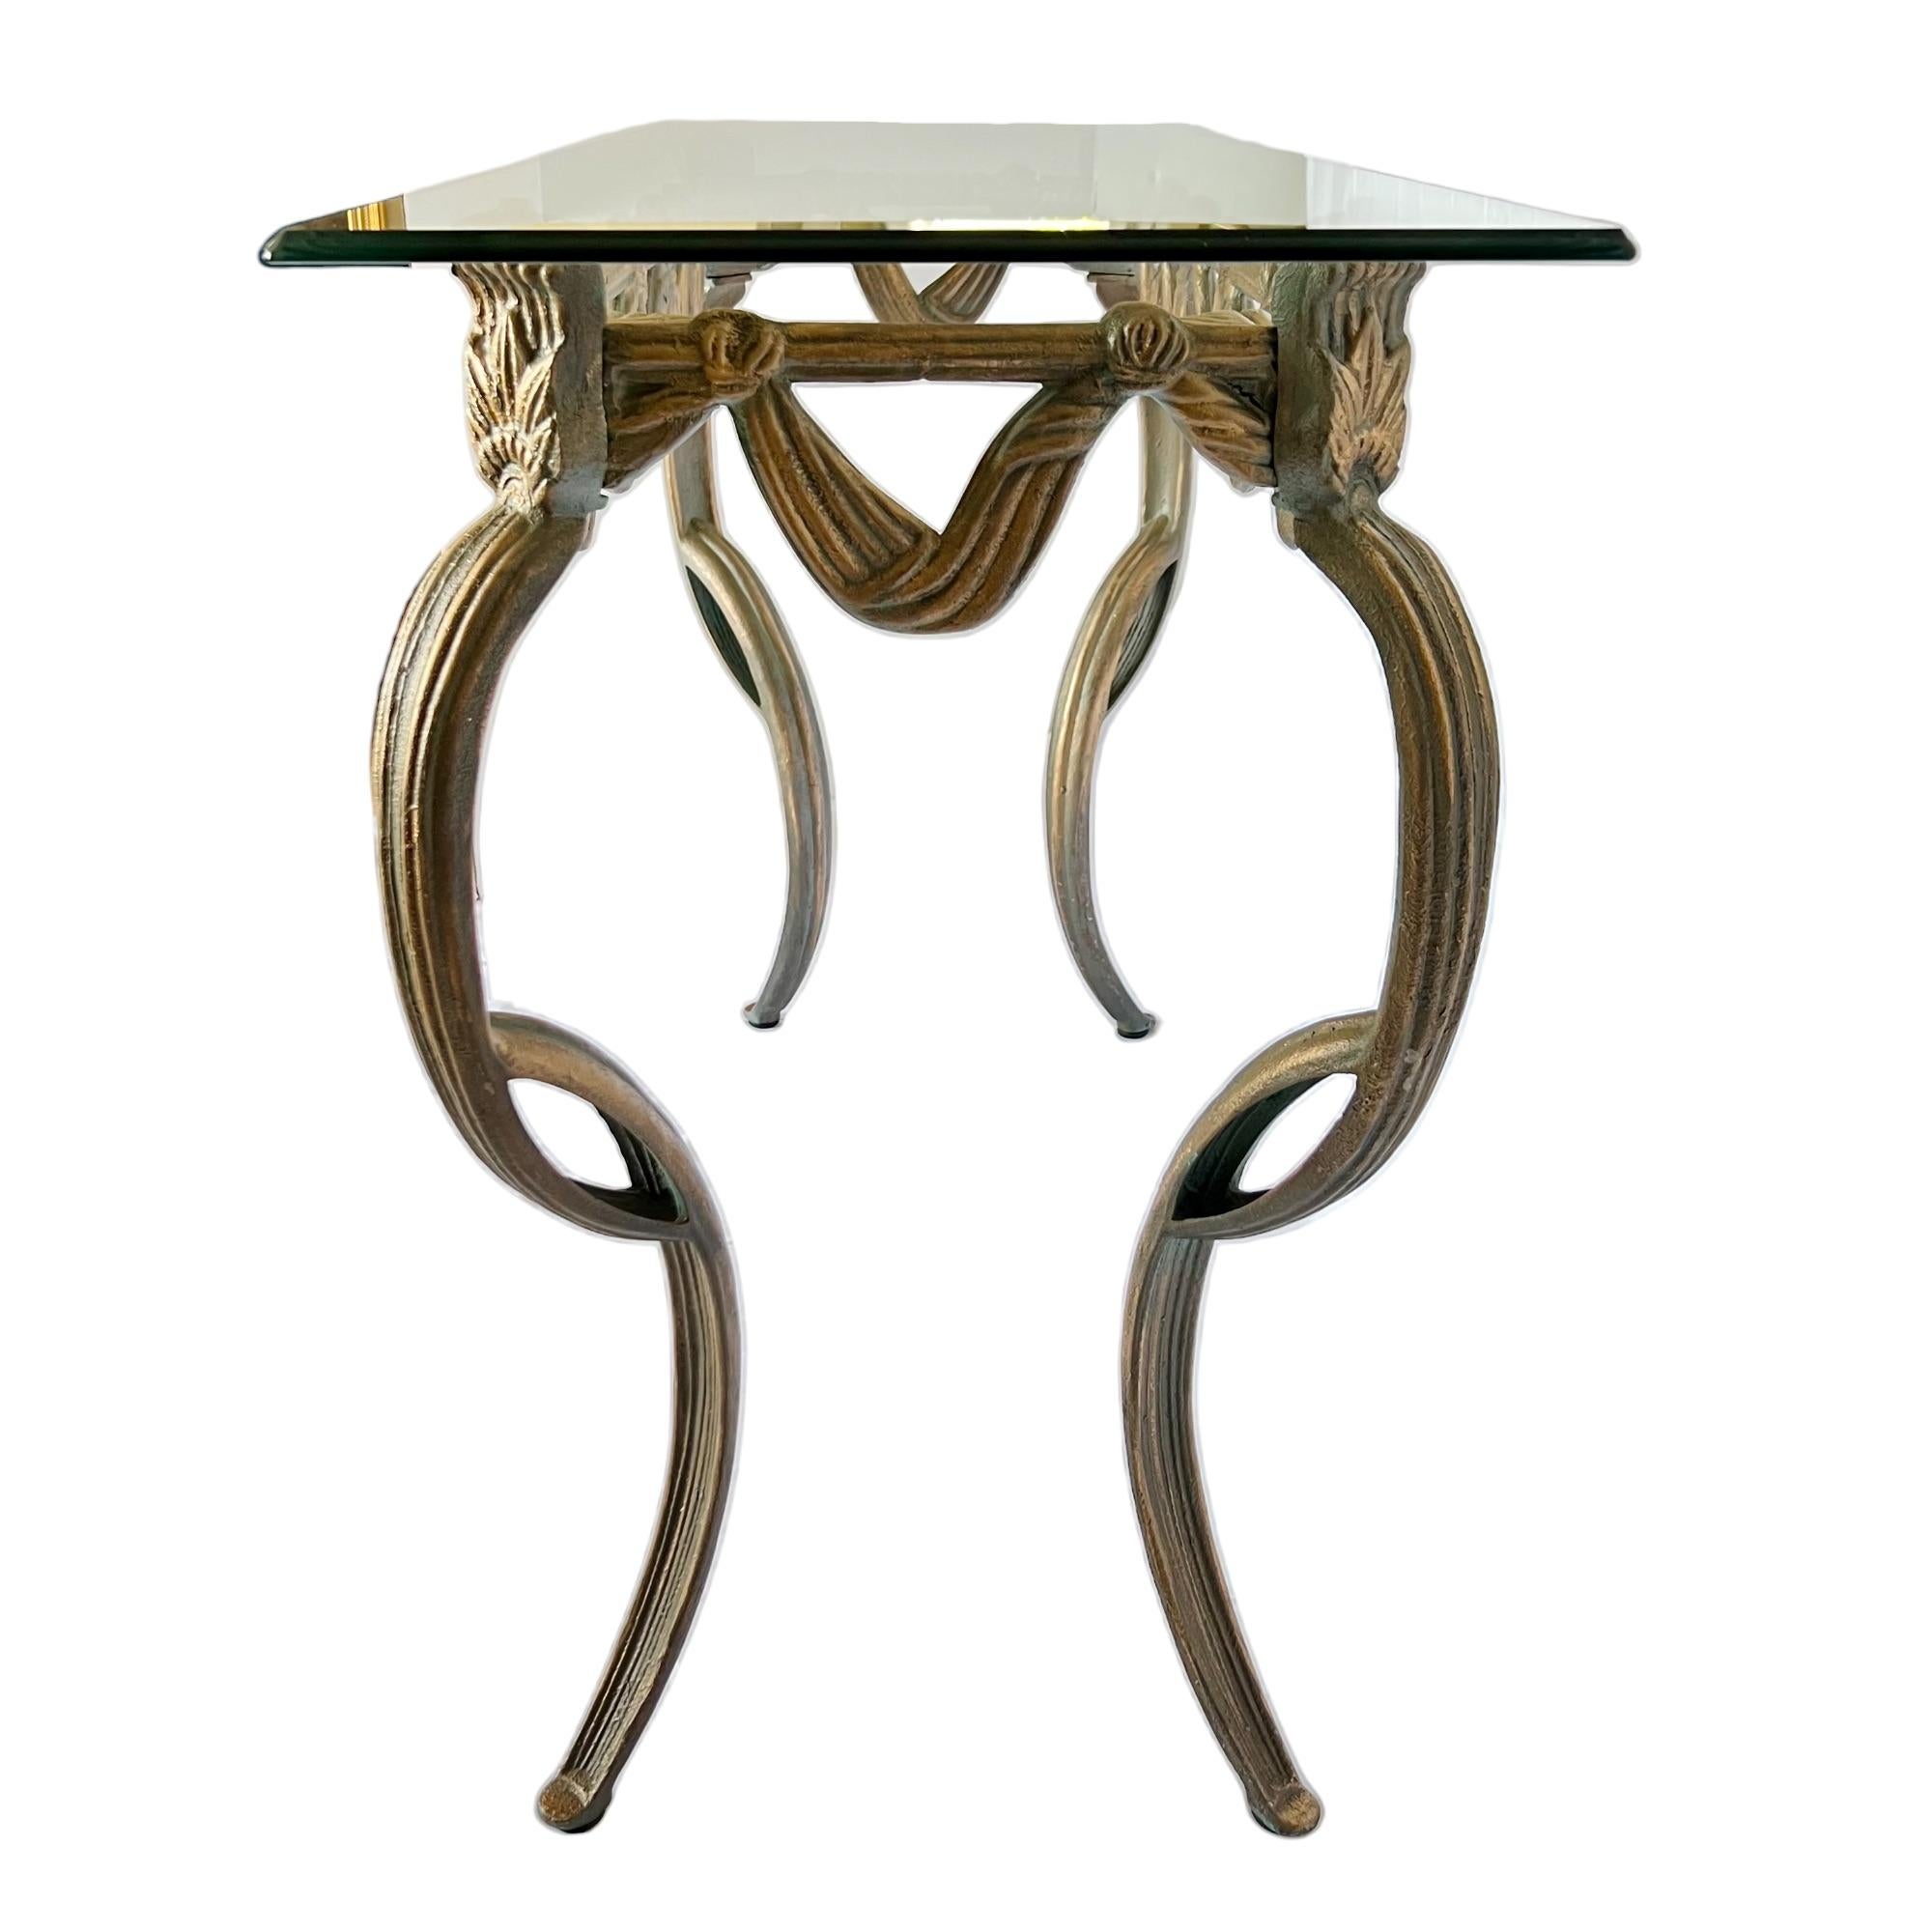 Late 20th Century Gold Patinated Cast Metal Cabriole Console Table, Late 20th C.